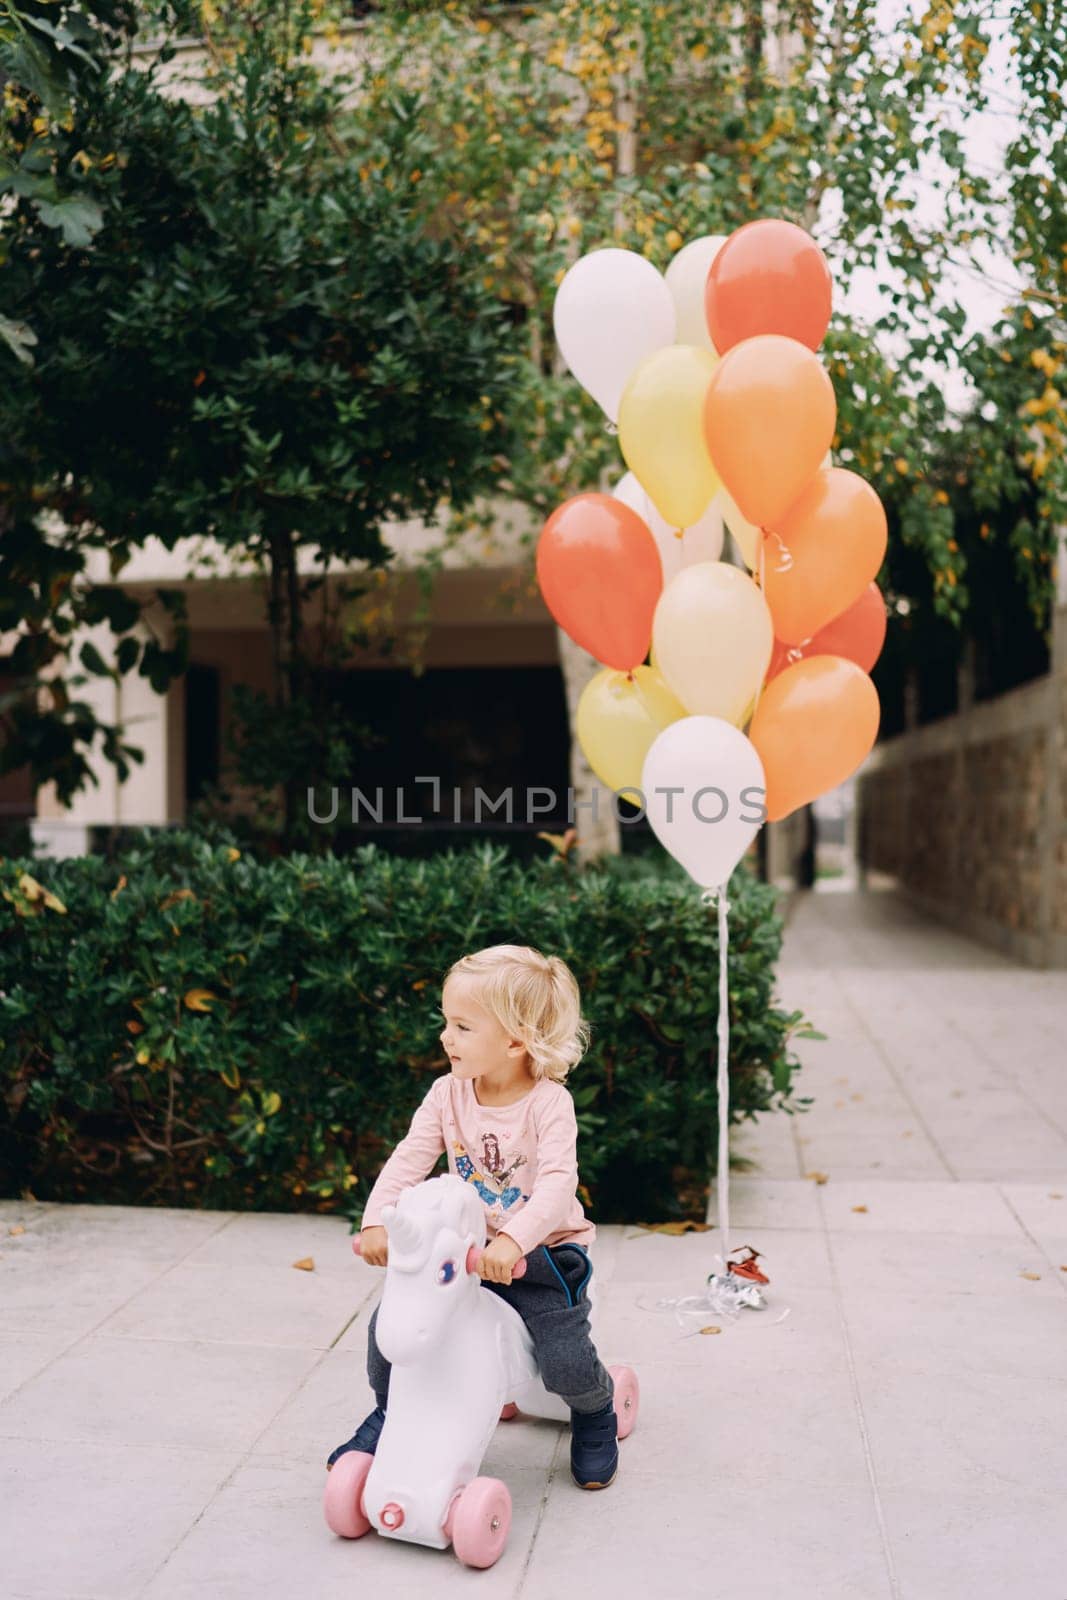 Little girl rides a unicorn balance bike in the garden against the background of colored balloons. High quality photo